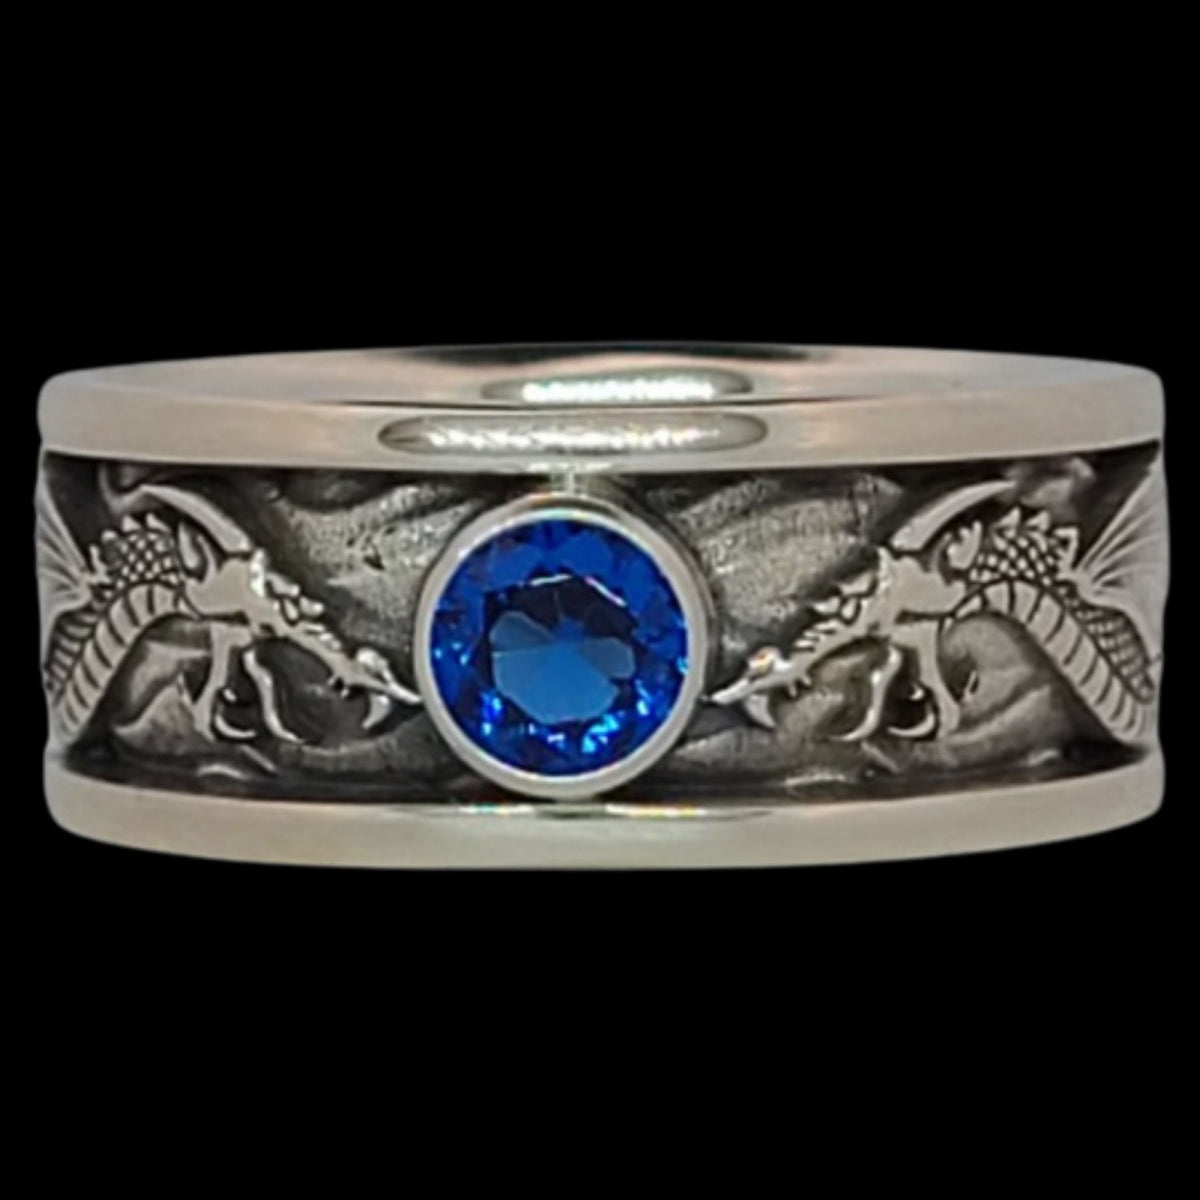 DRACO THE DRAGON SOLITAIRE Band Ring in SILVER, CONTINUUM SILVER or SILVER &amp; GOLD with CHOICE OF 5mm GEMSTONE - Starting at $249